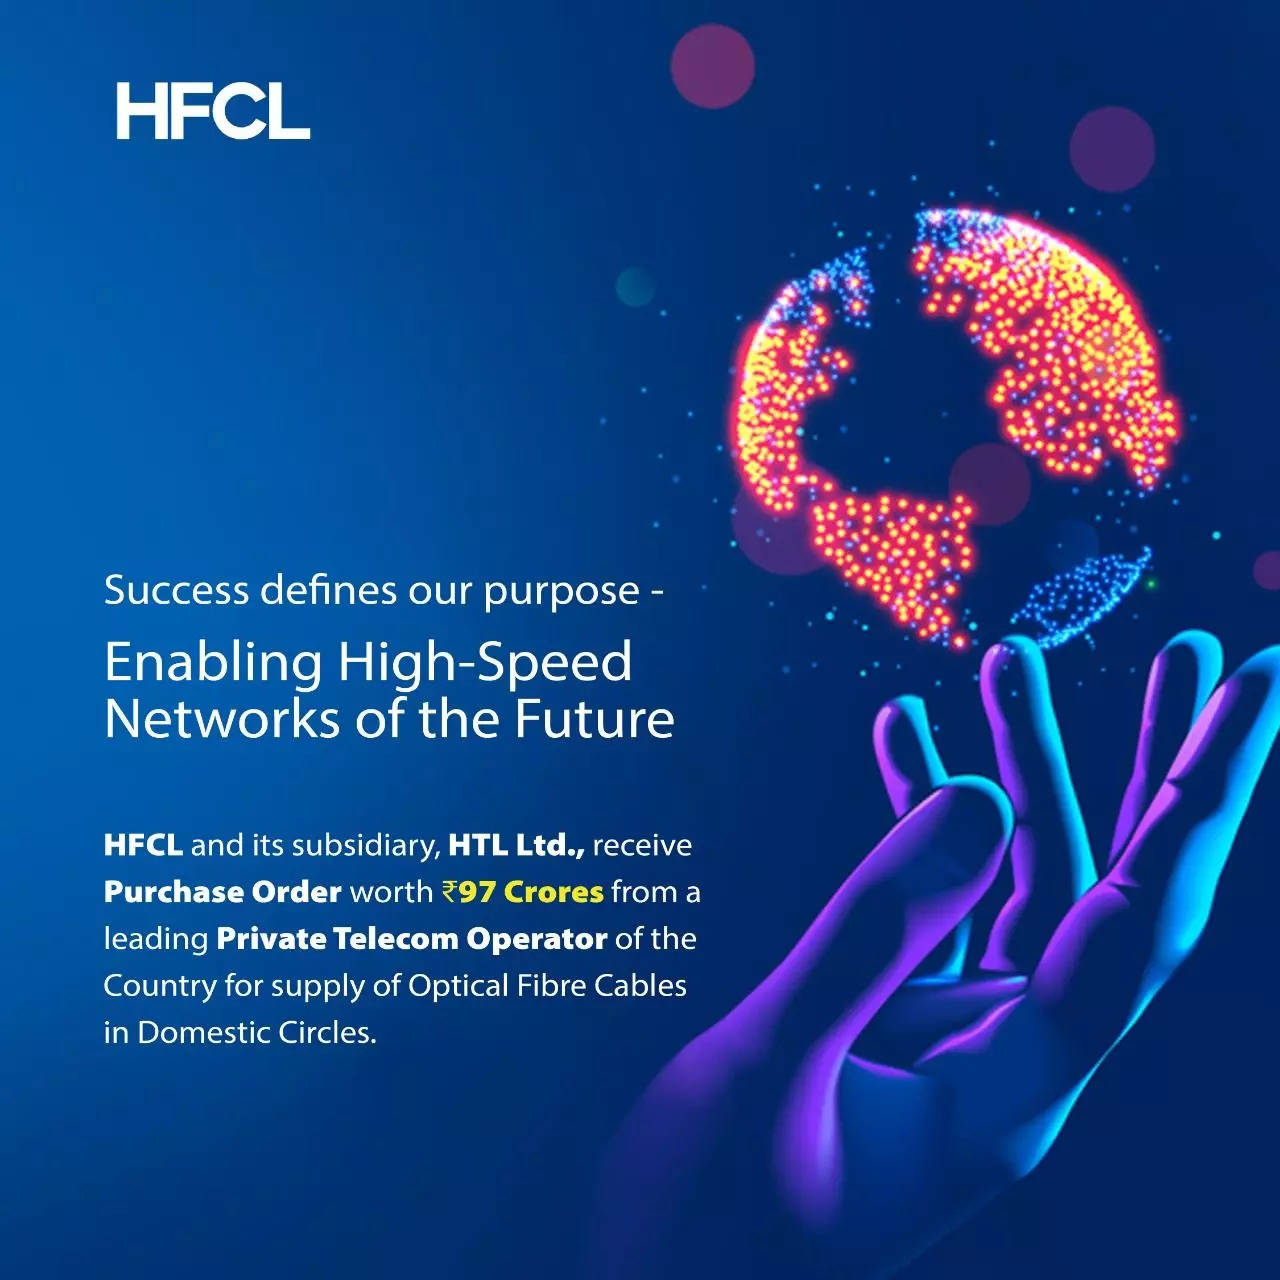 HFCL bags deals worth Rs 97 crore from leading Indian telco for supply of optical fibre cables